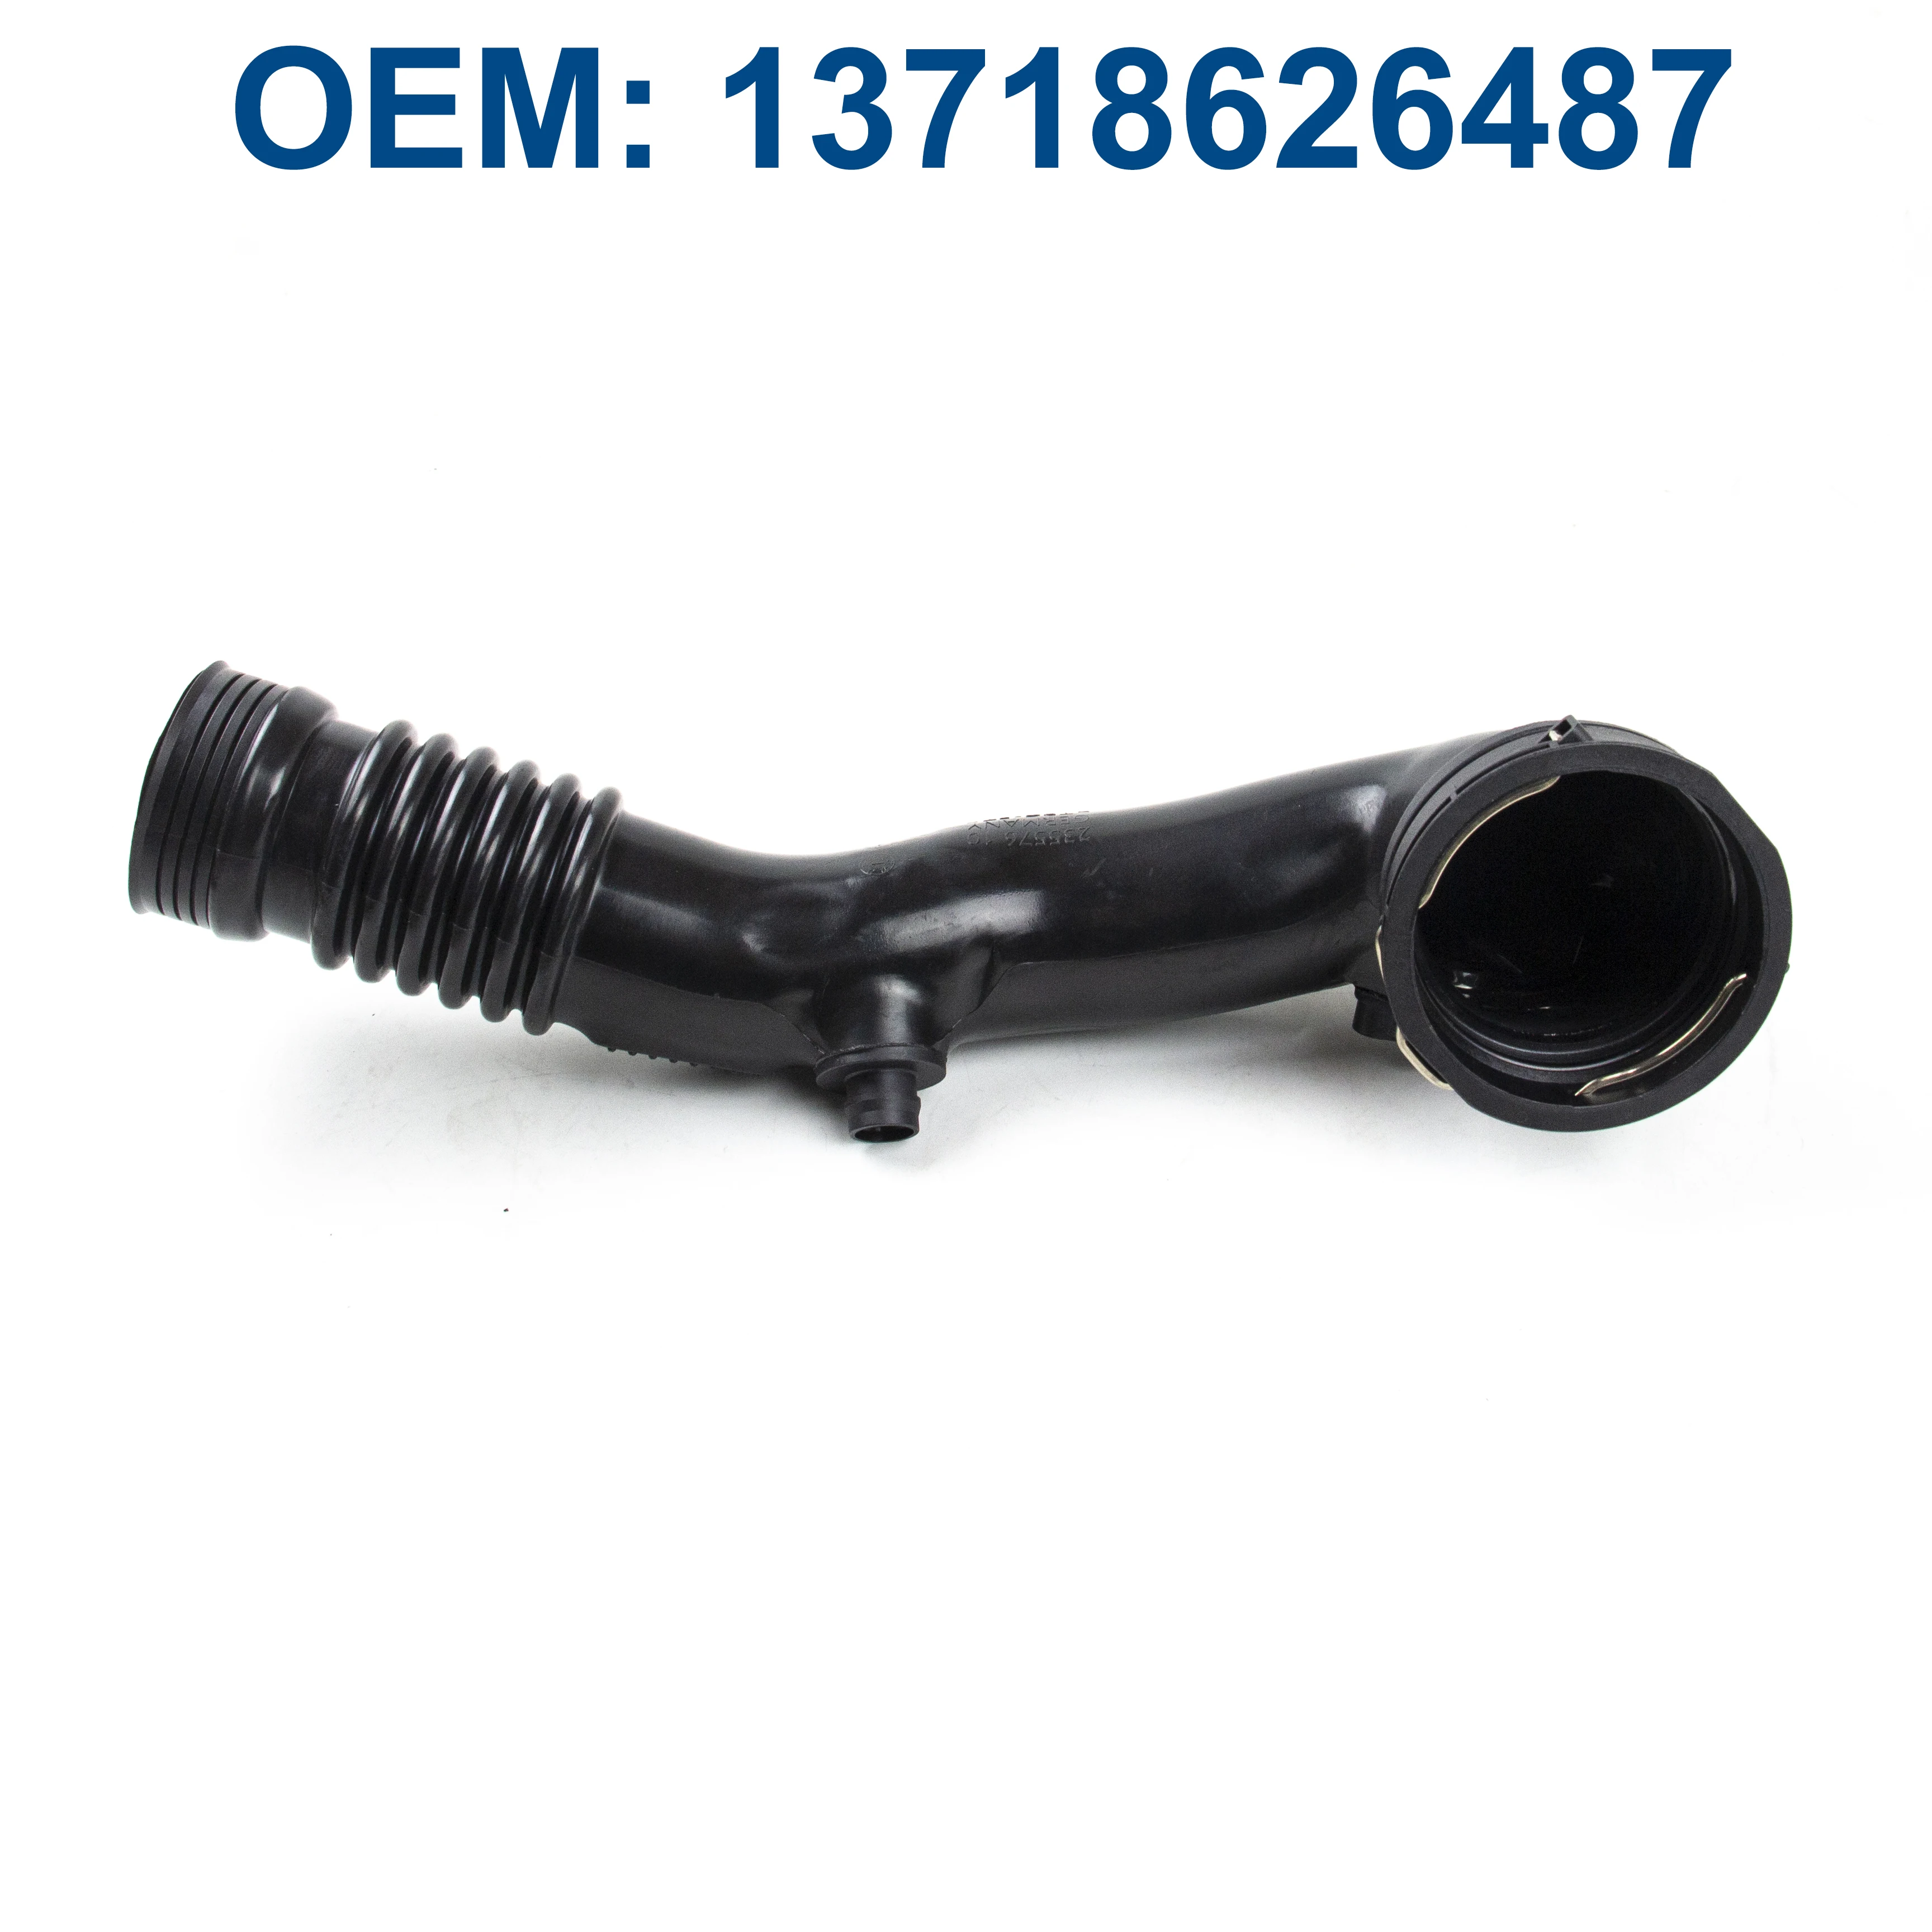 

13718626487 Air Guide Tube Pipe For BMW 5'F 18 LCI/6'/X5/X6 Water Tank Connection Water Hose Free Shipping